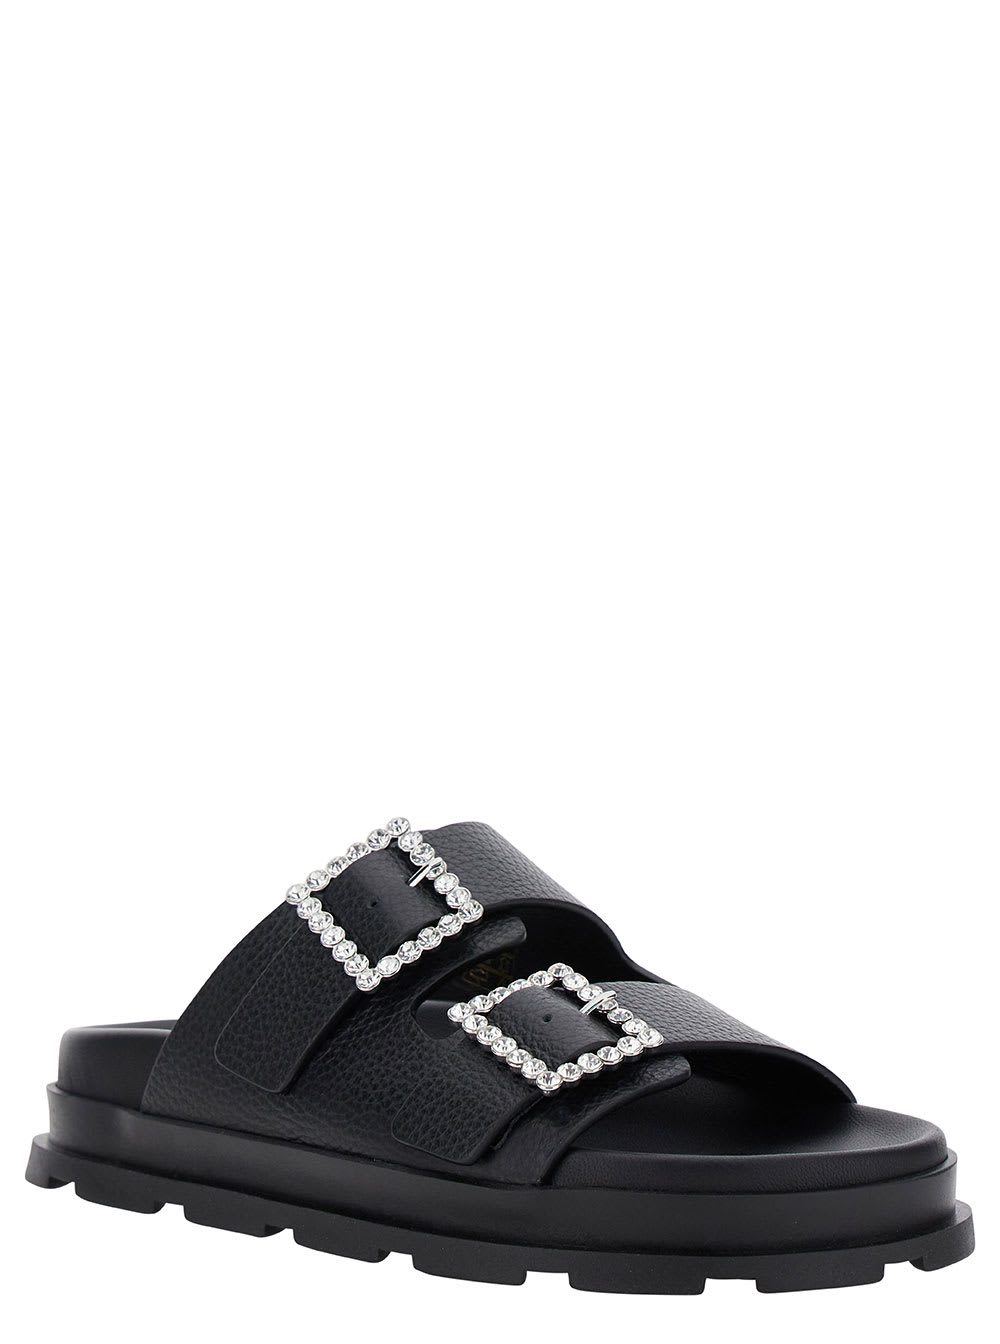 Shop Pollini Black Sandals With Rhinestone Buckle In Hammered Leather Woman